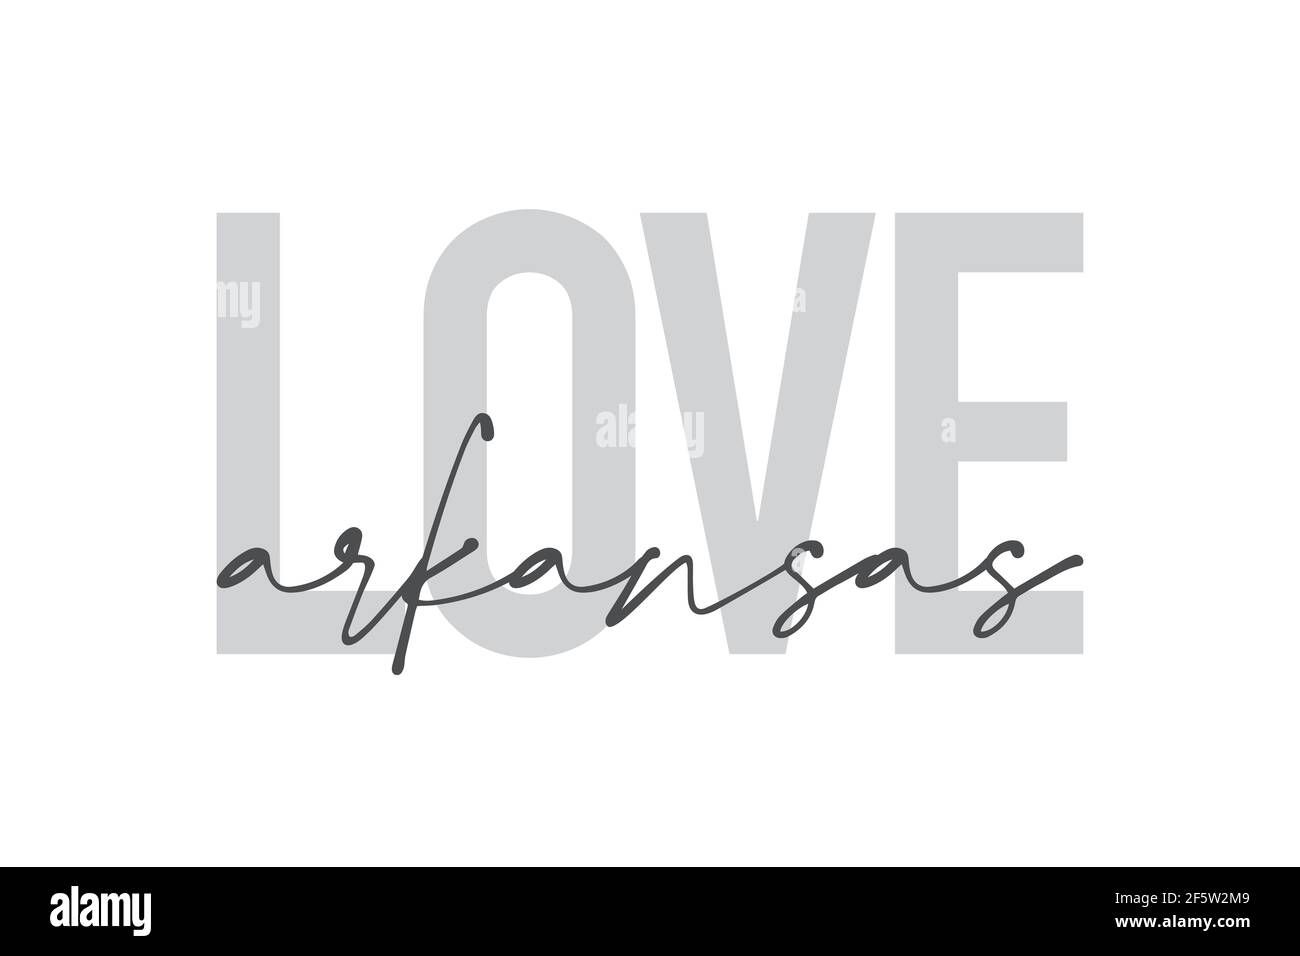 Modern, urban, simple graphic design of a saying 'Love Arkansas' in grey colors. Trendy, cool, handwritten typography Stock Photo